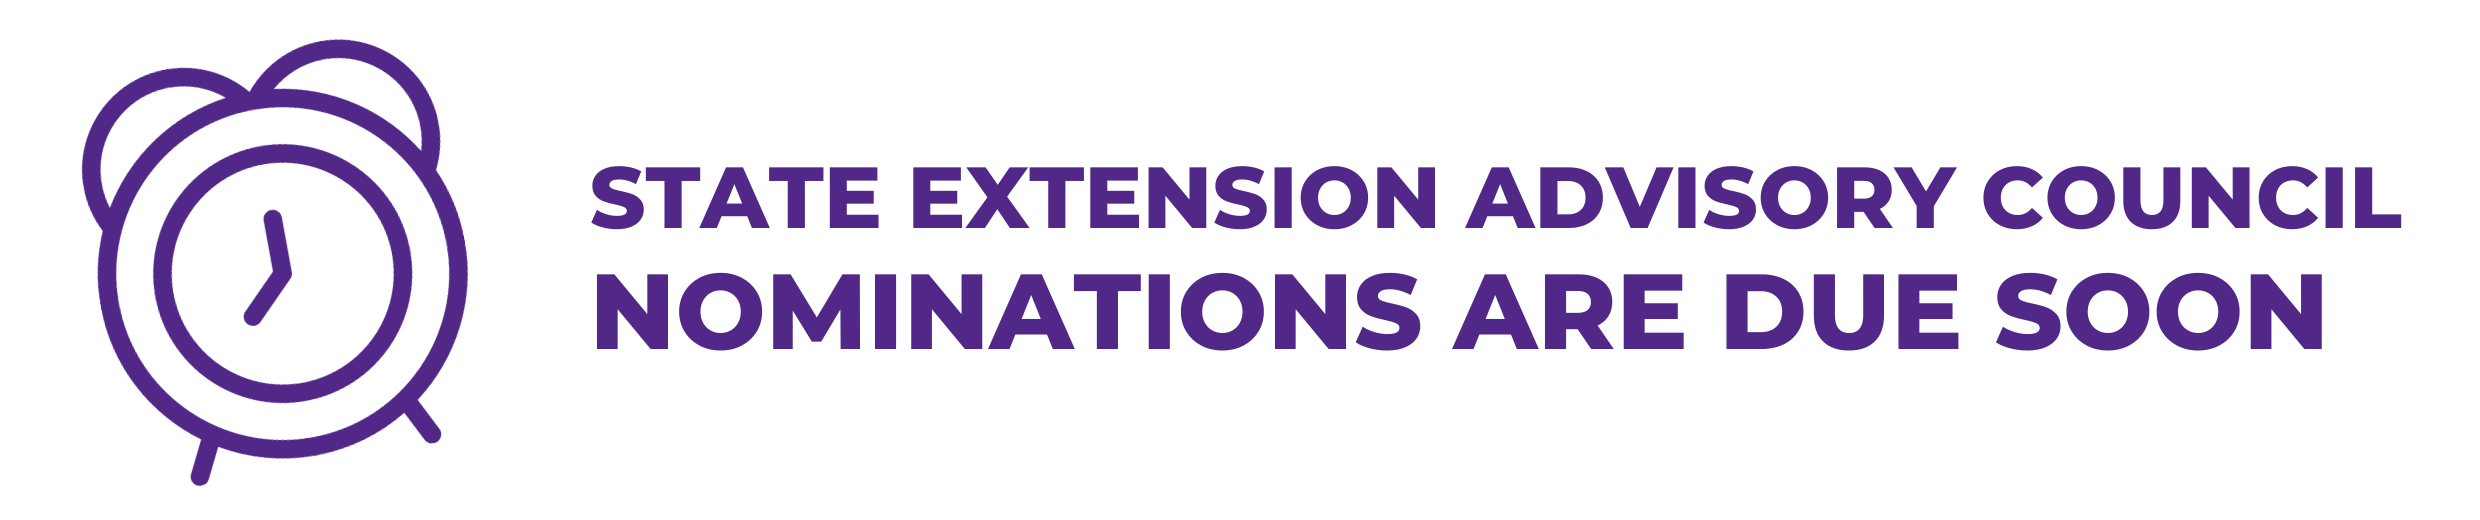 State Extension Advisory Council Nominations are Due Soon